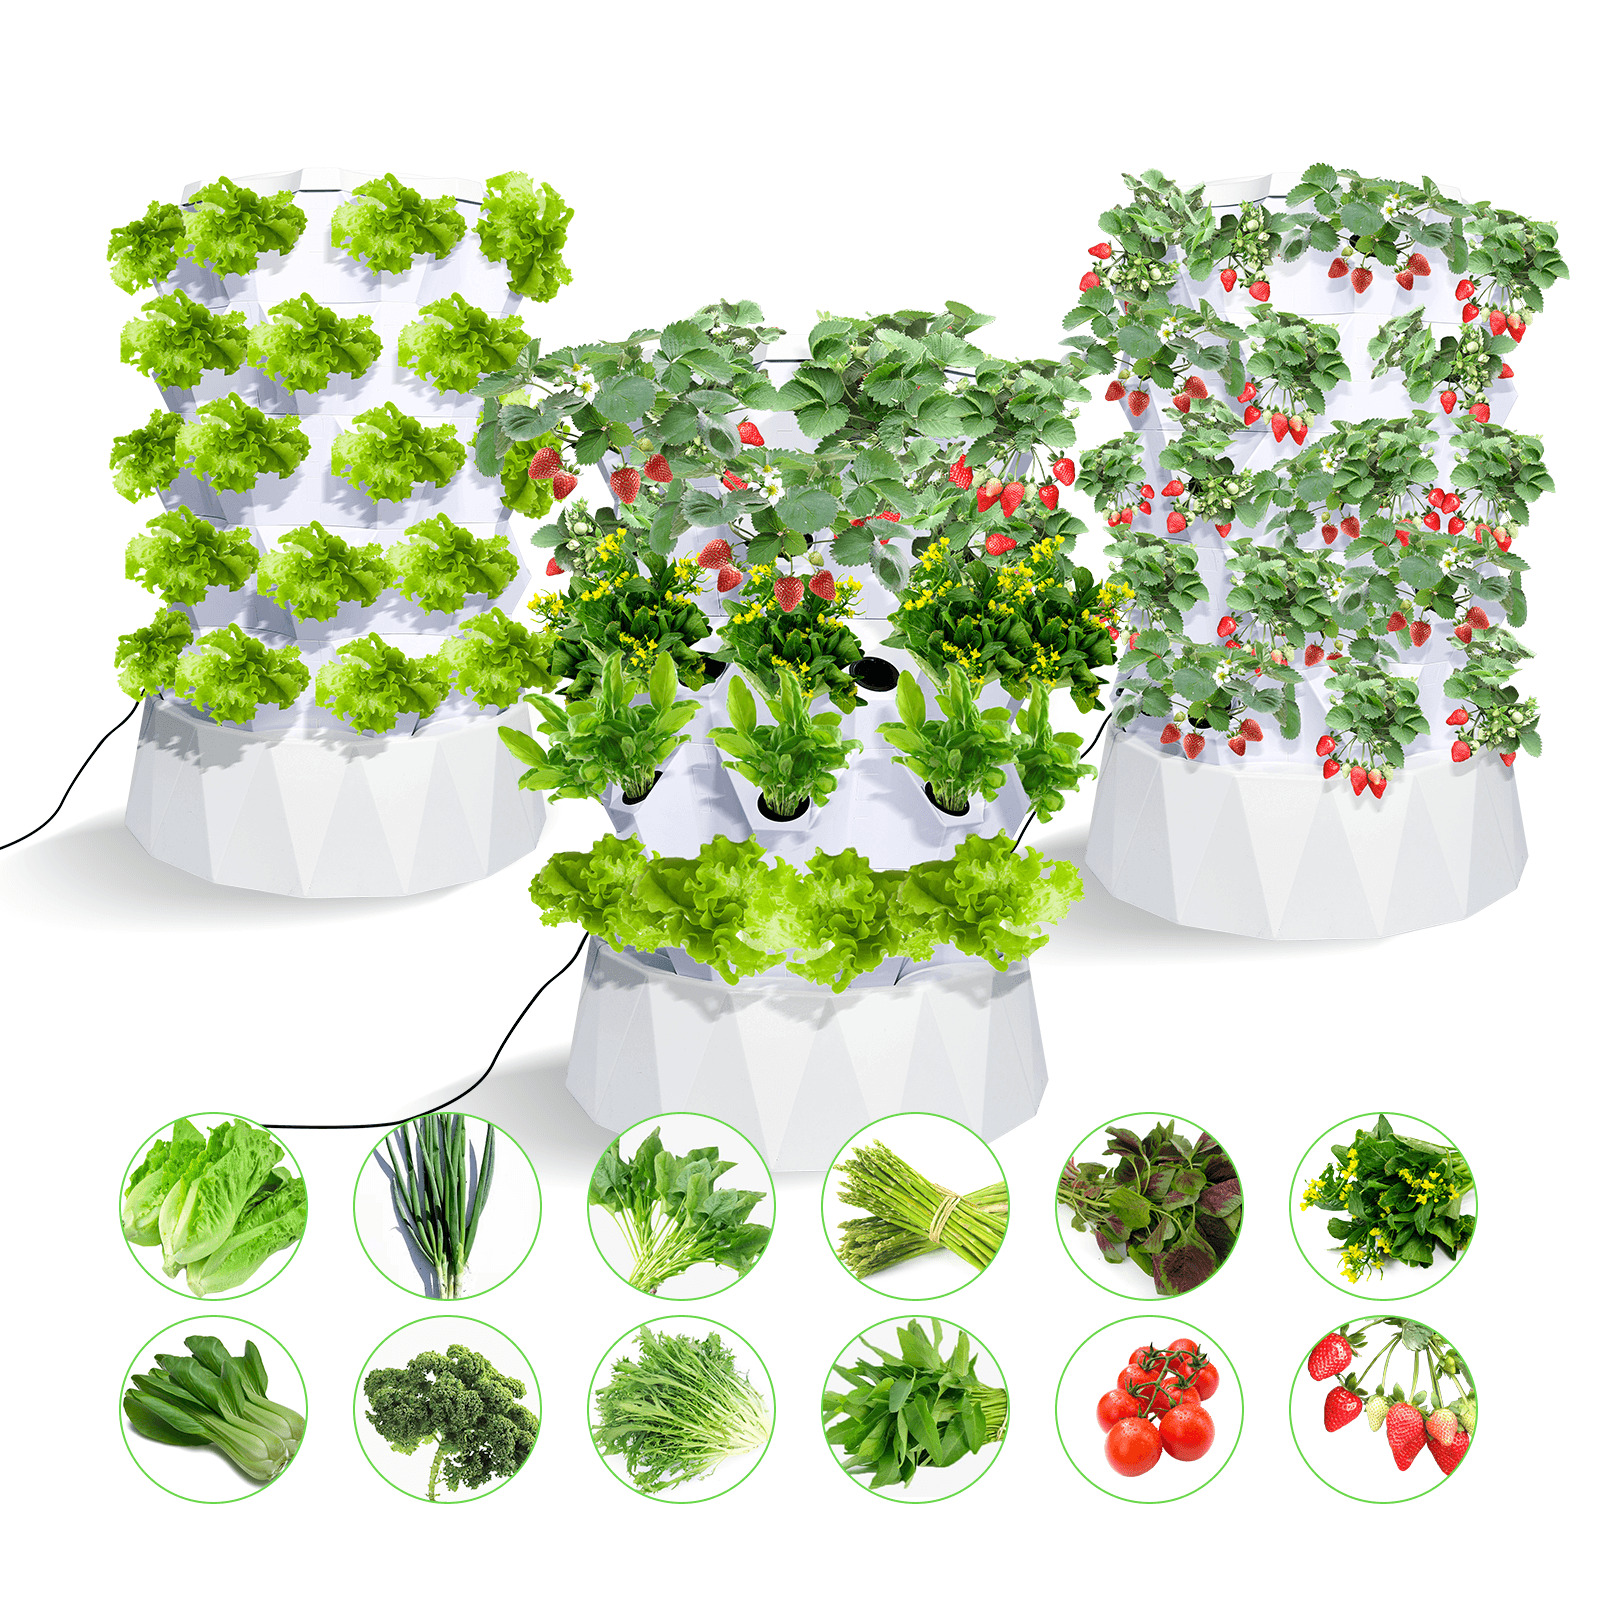 Vertical Hydroponic System Tower Garden Aeroponics Home Grow Kit 5 Layer 40Pots